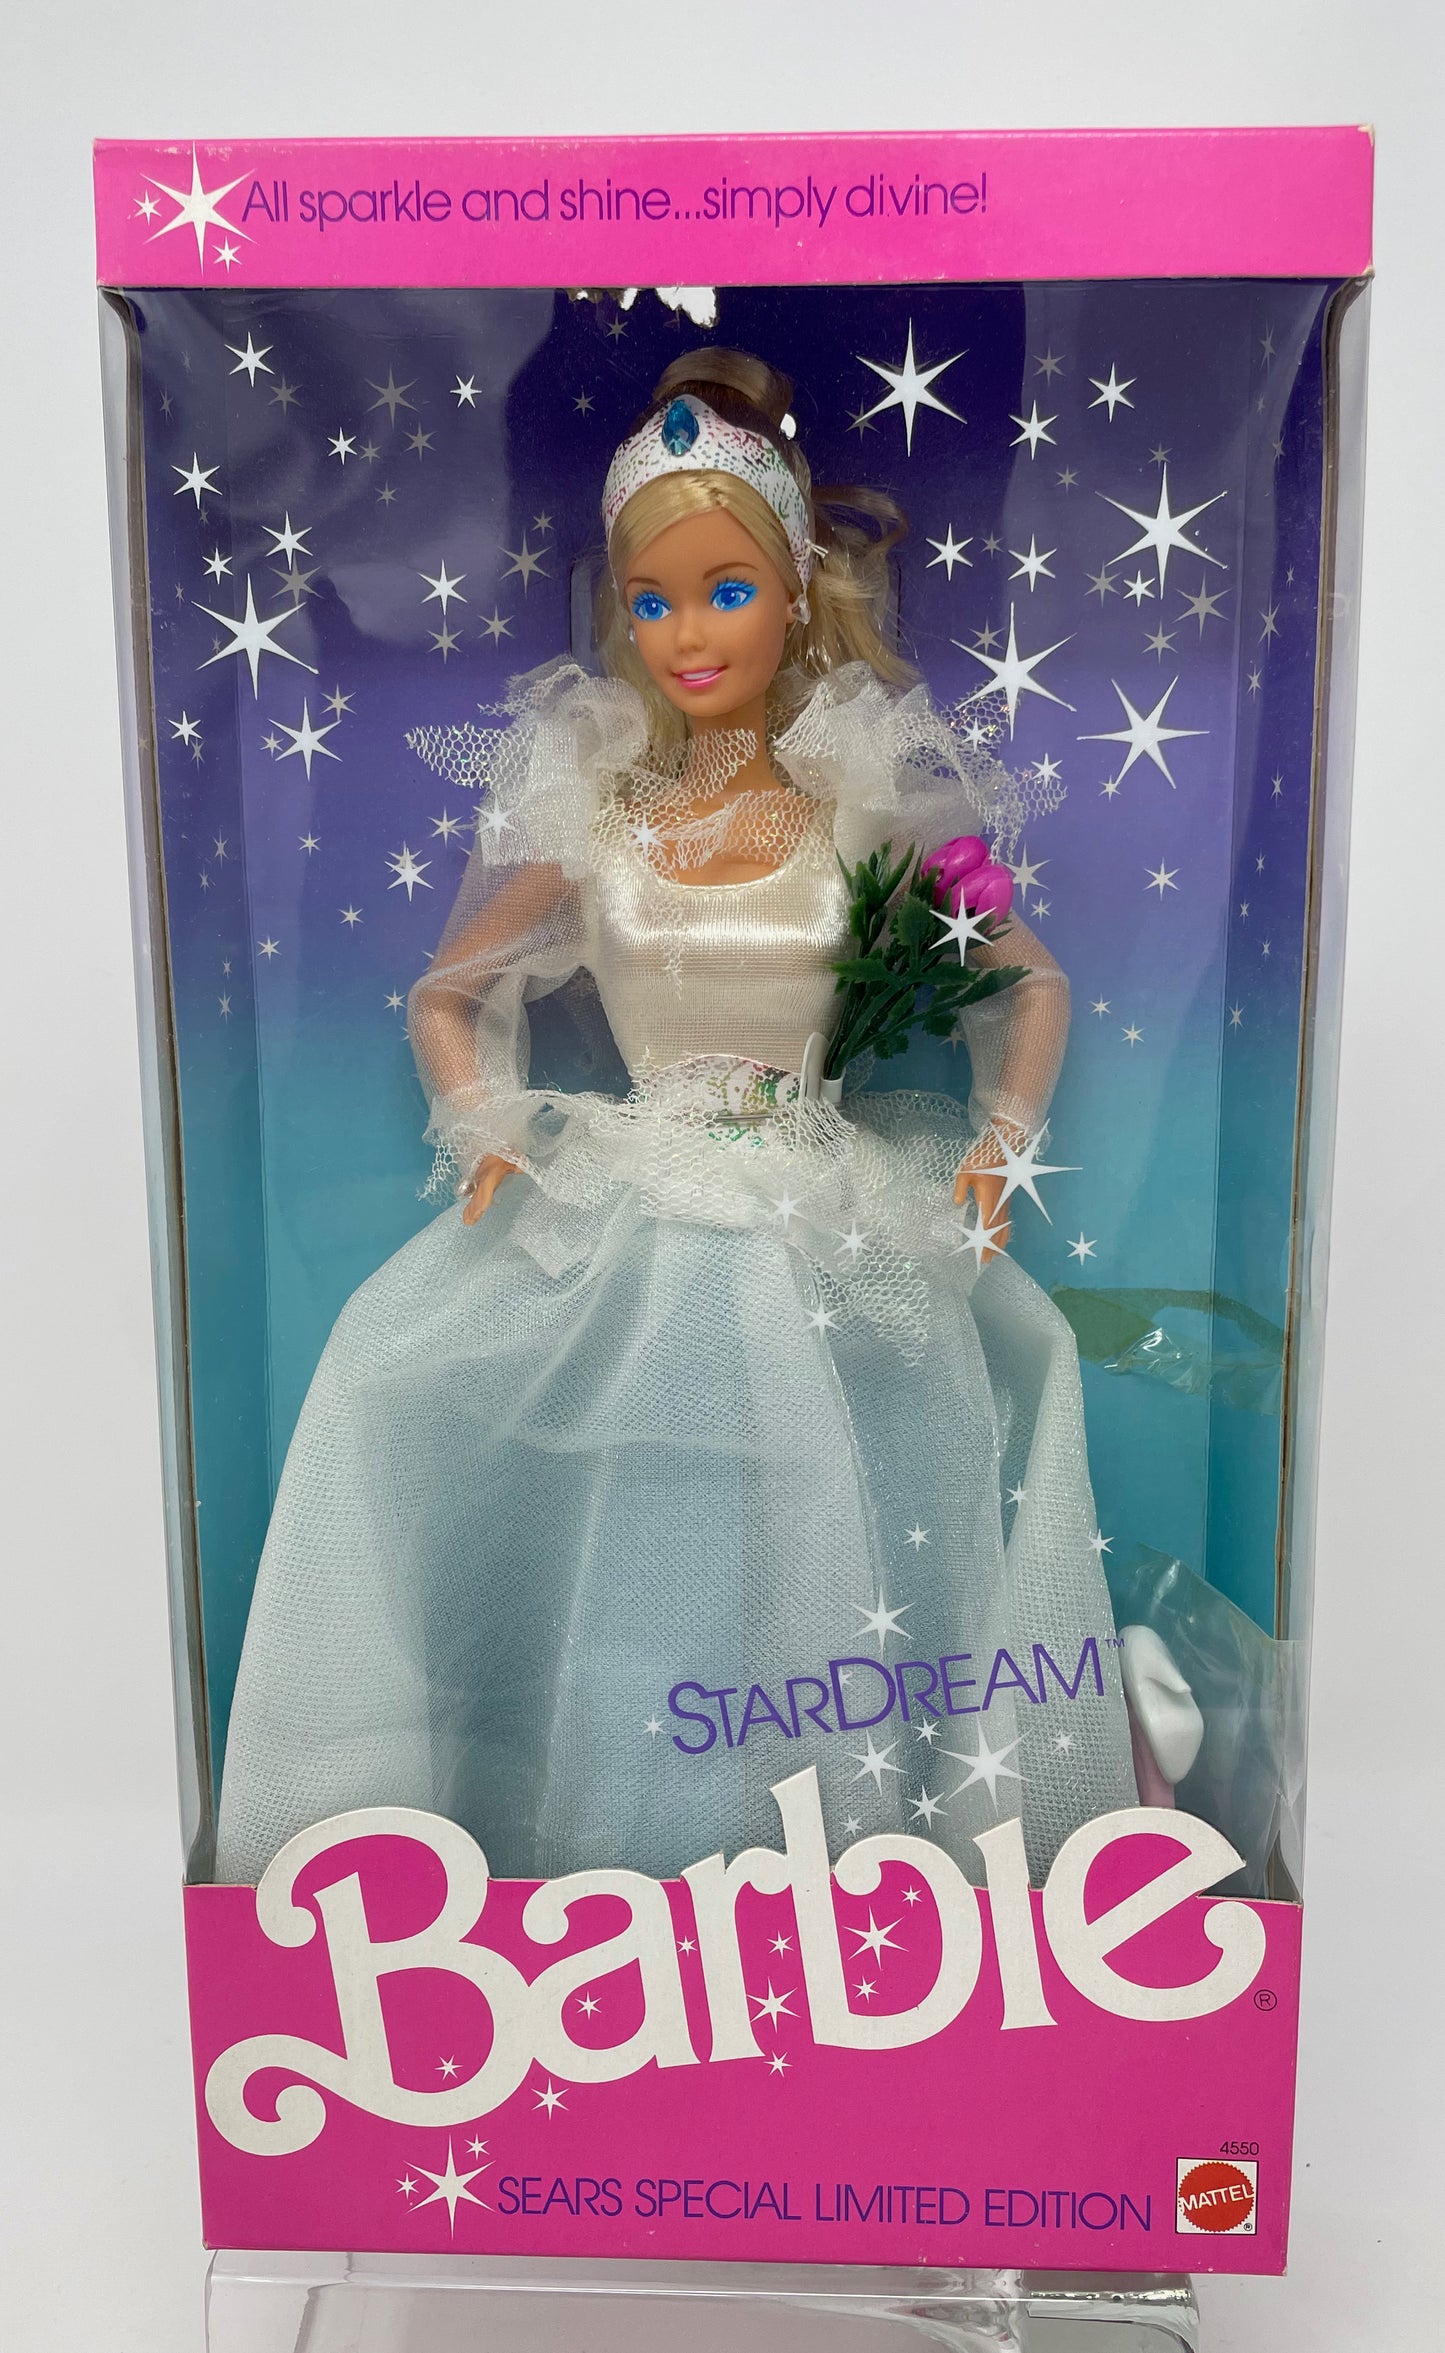 STARDREAM BARBIE *DAMAGED* - SEARS SPECIAL LIMITED EDITION #4550 - MATTEL 1987